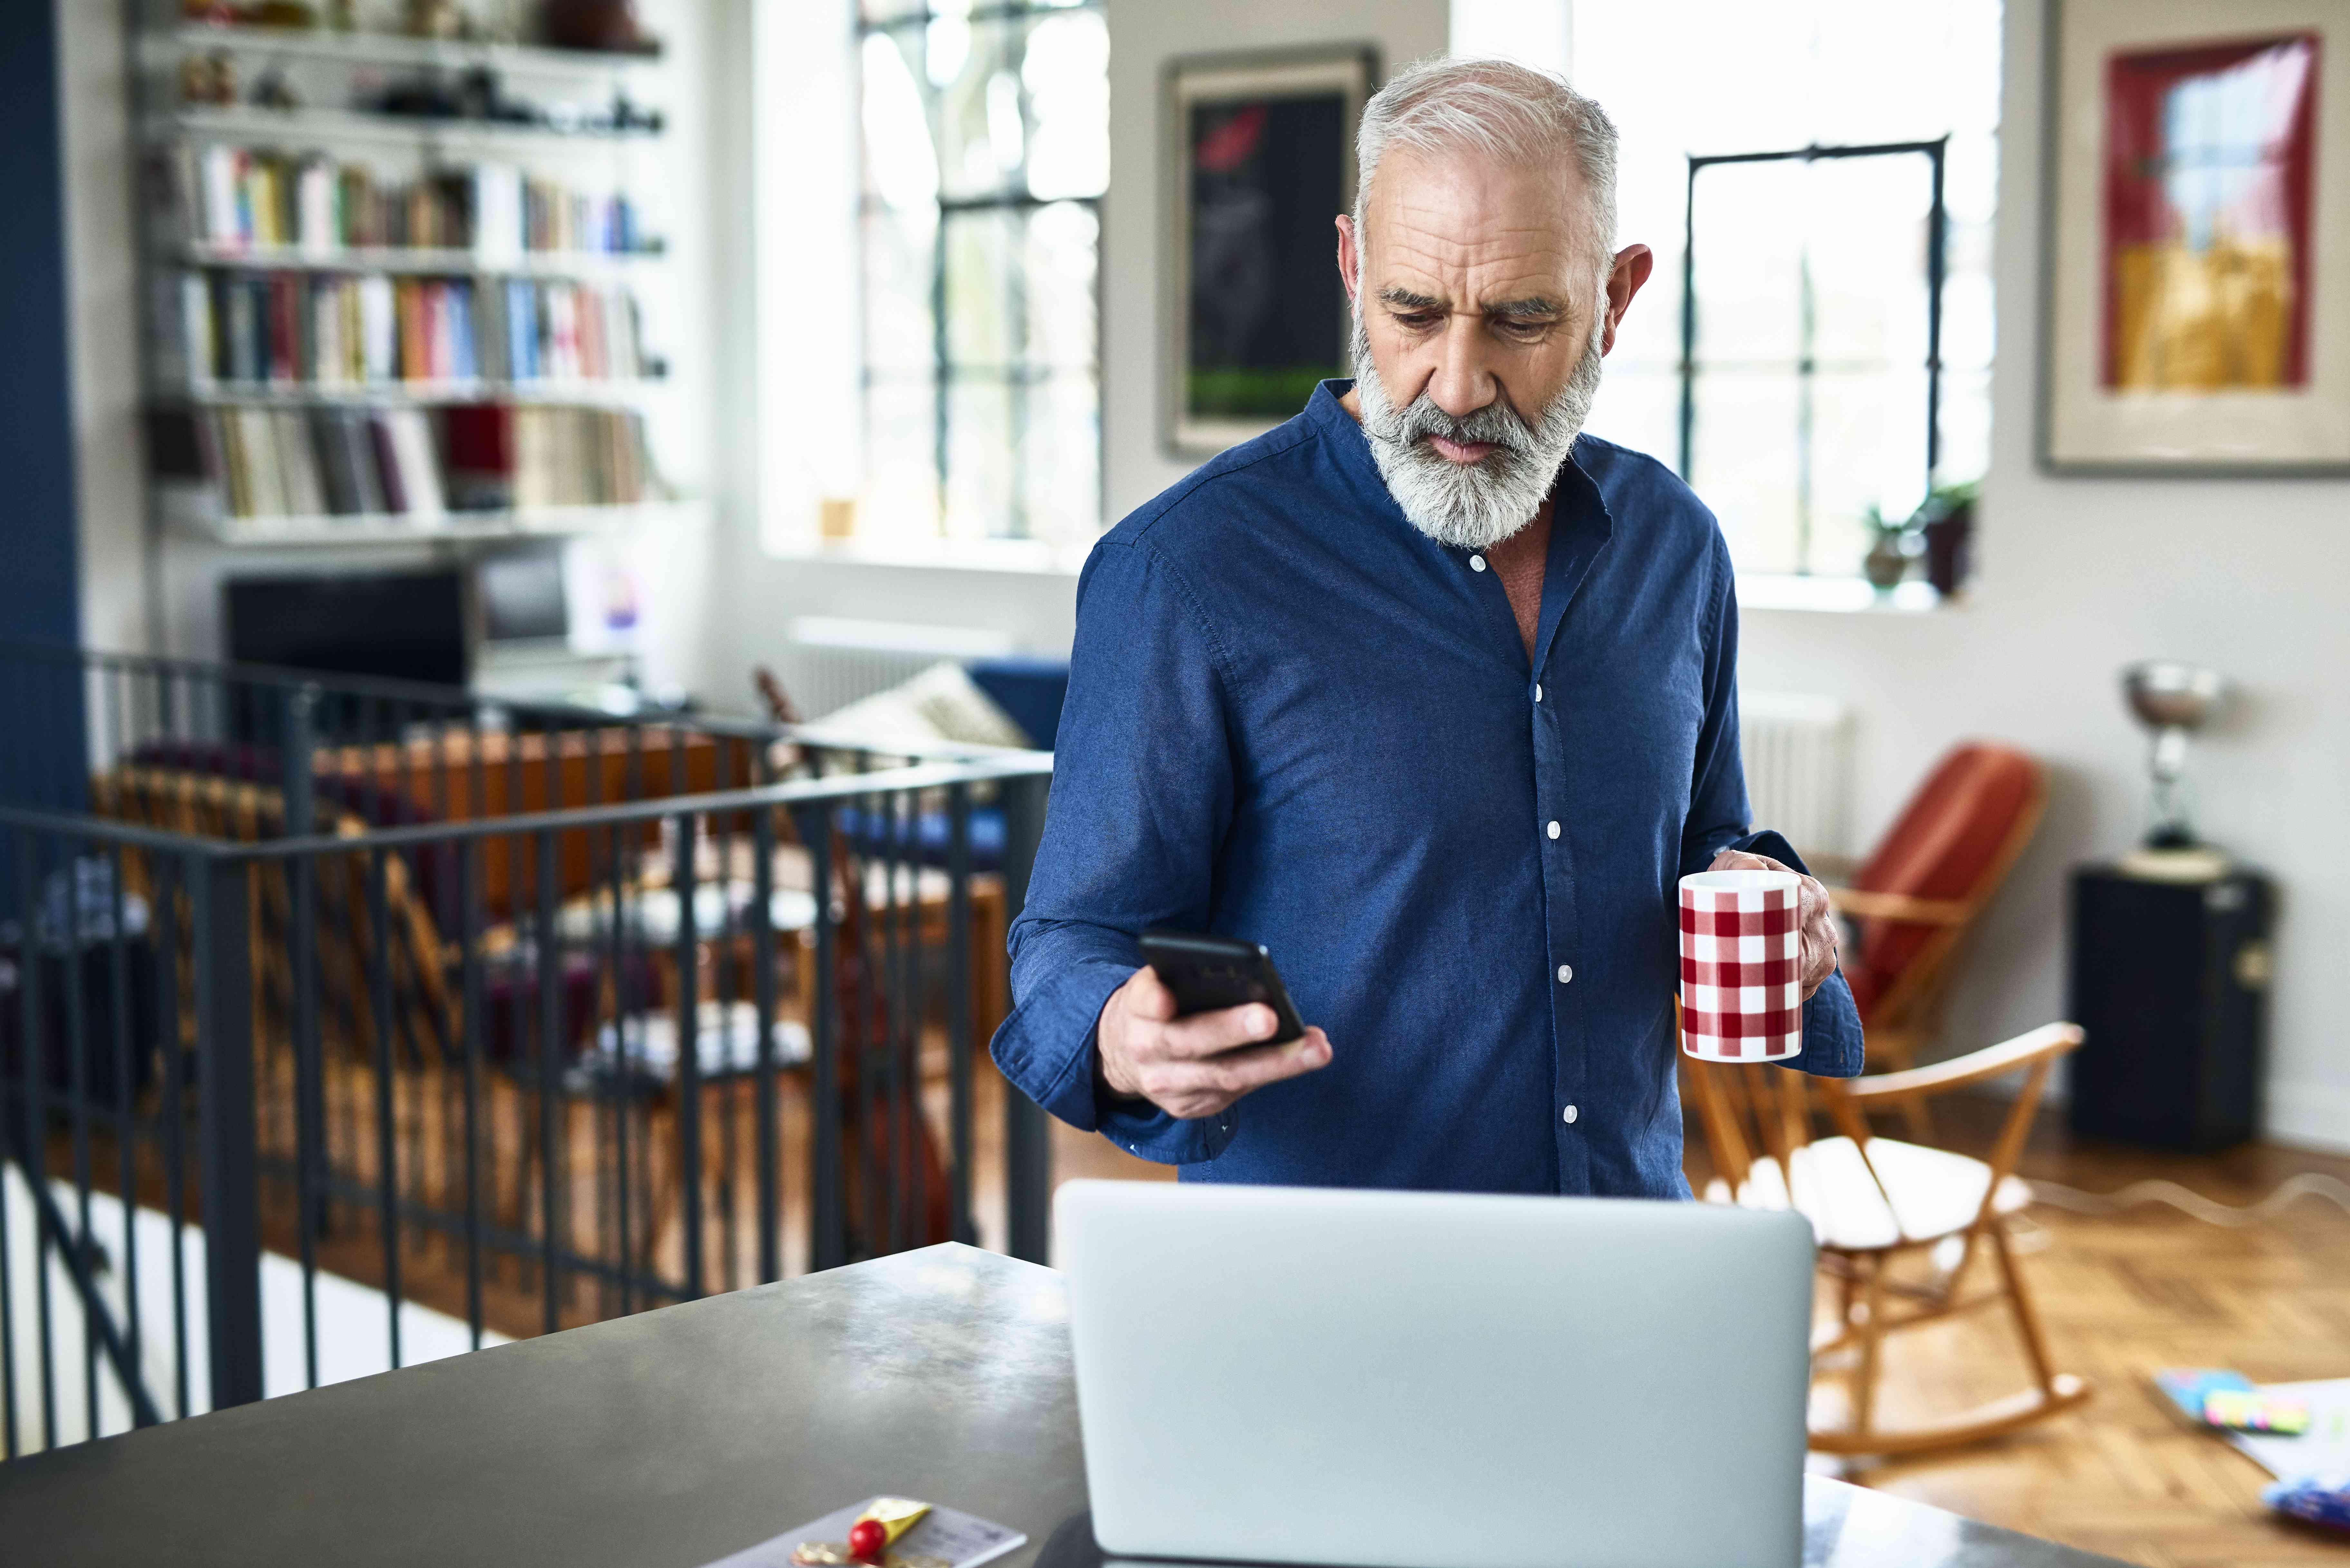 man looks at phone and laptop while holding coffee cup